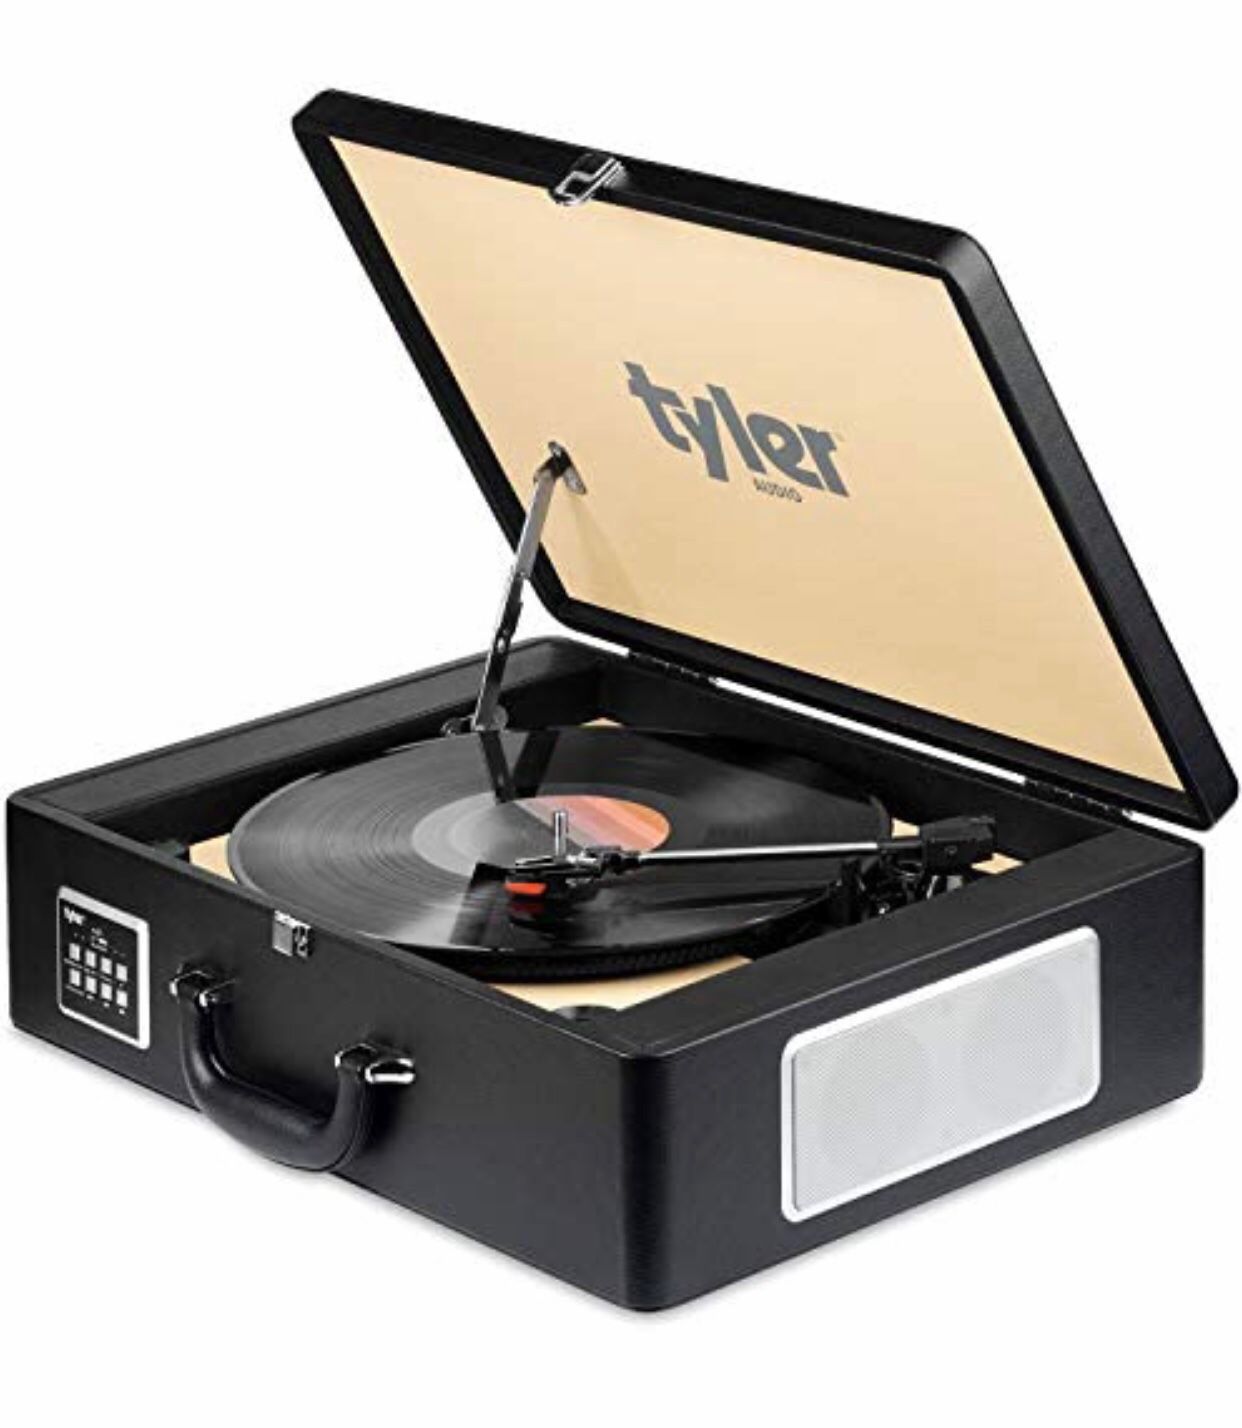 Tyler Bluetooth Briefcase Vinyl Record Player Classic Turntable Stereo System with Built-in Speakers, MP3 Player and USB Recording, Bluetooth, Headpho